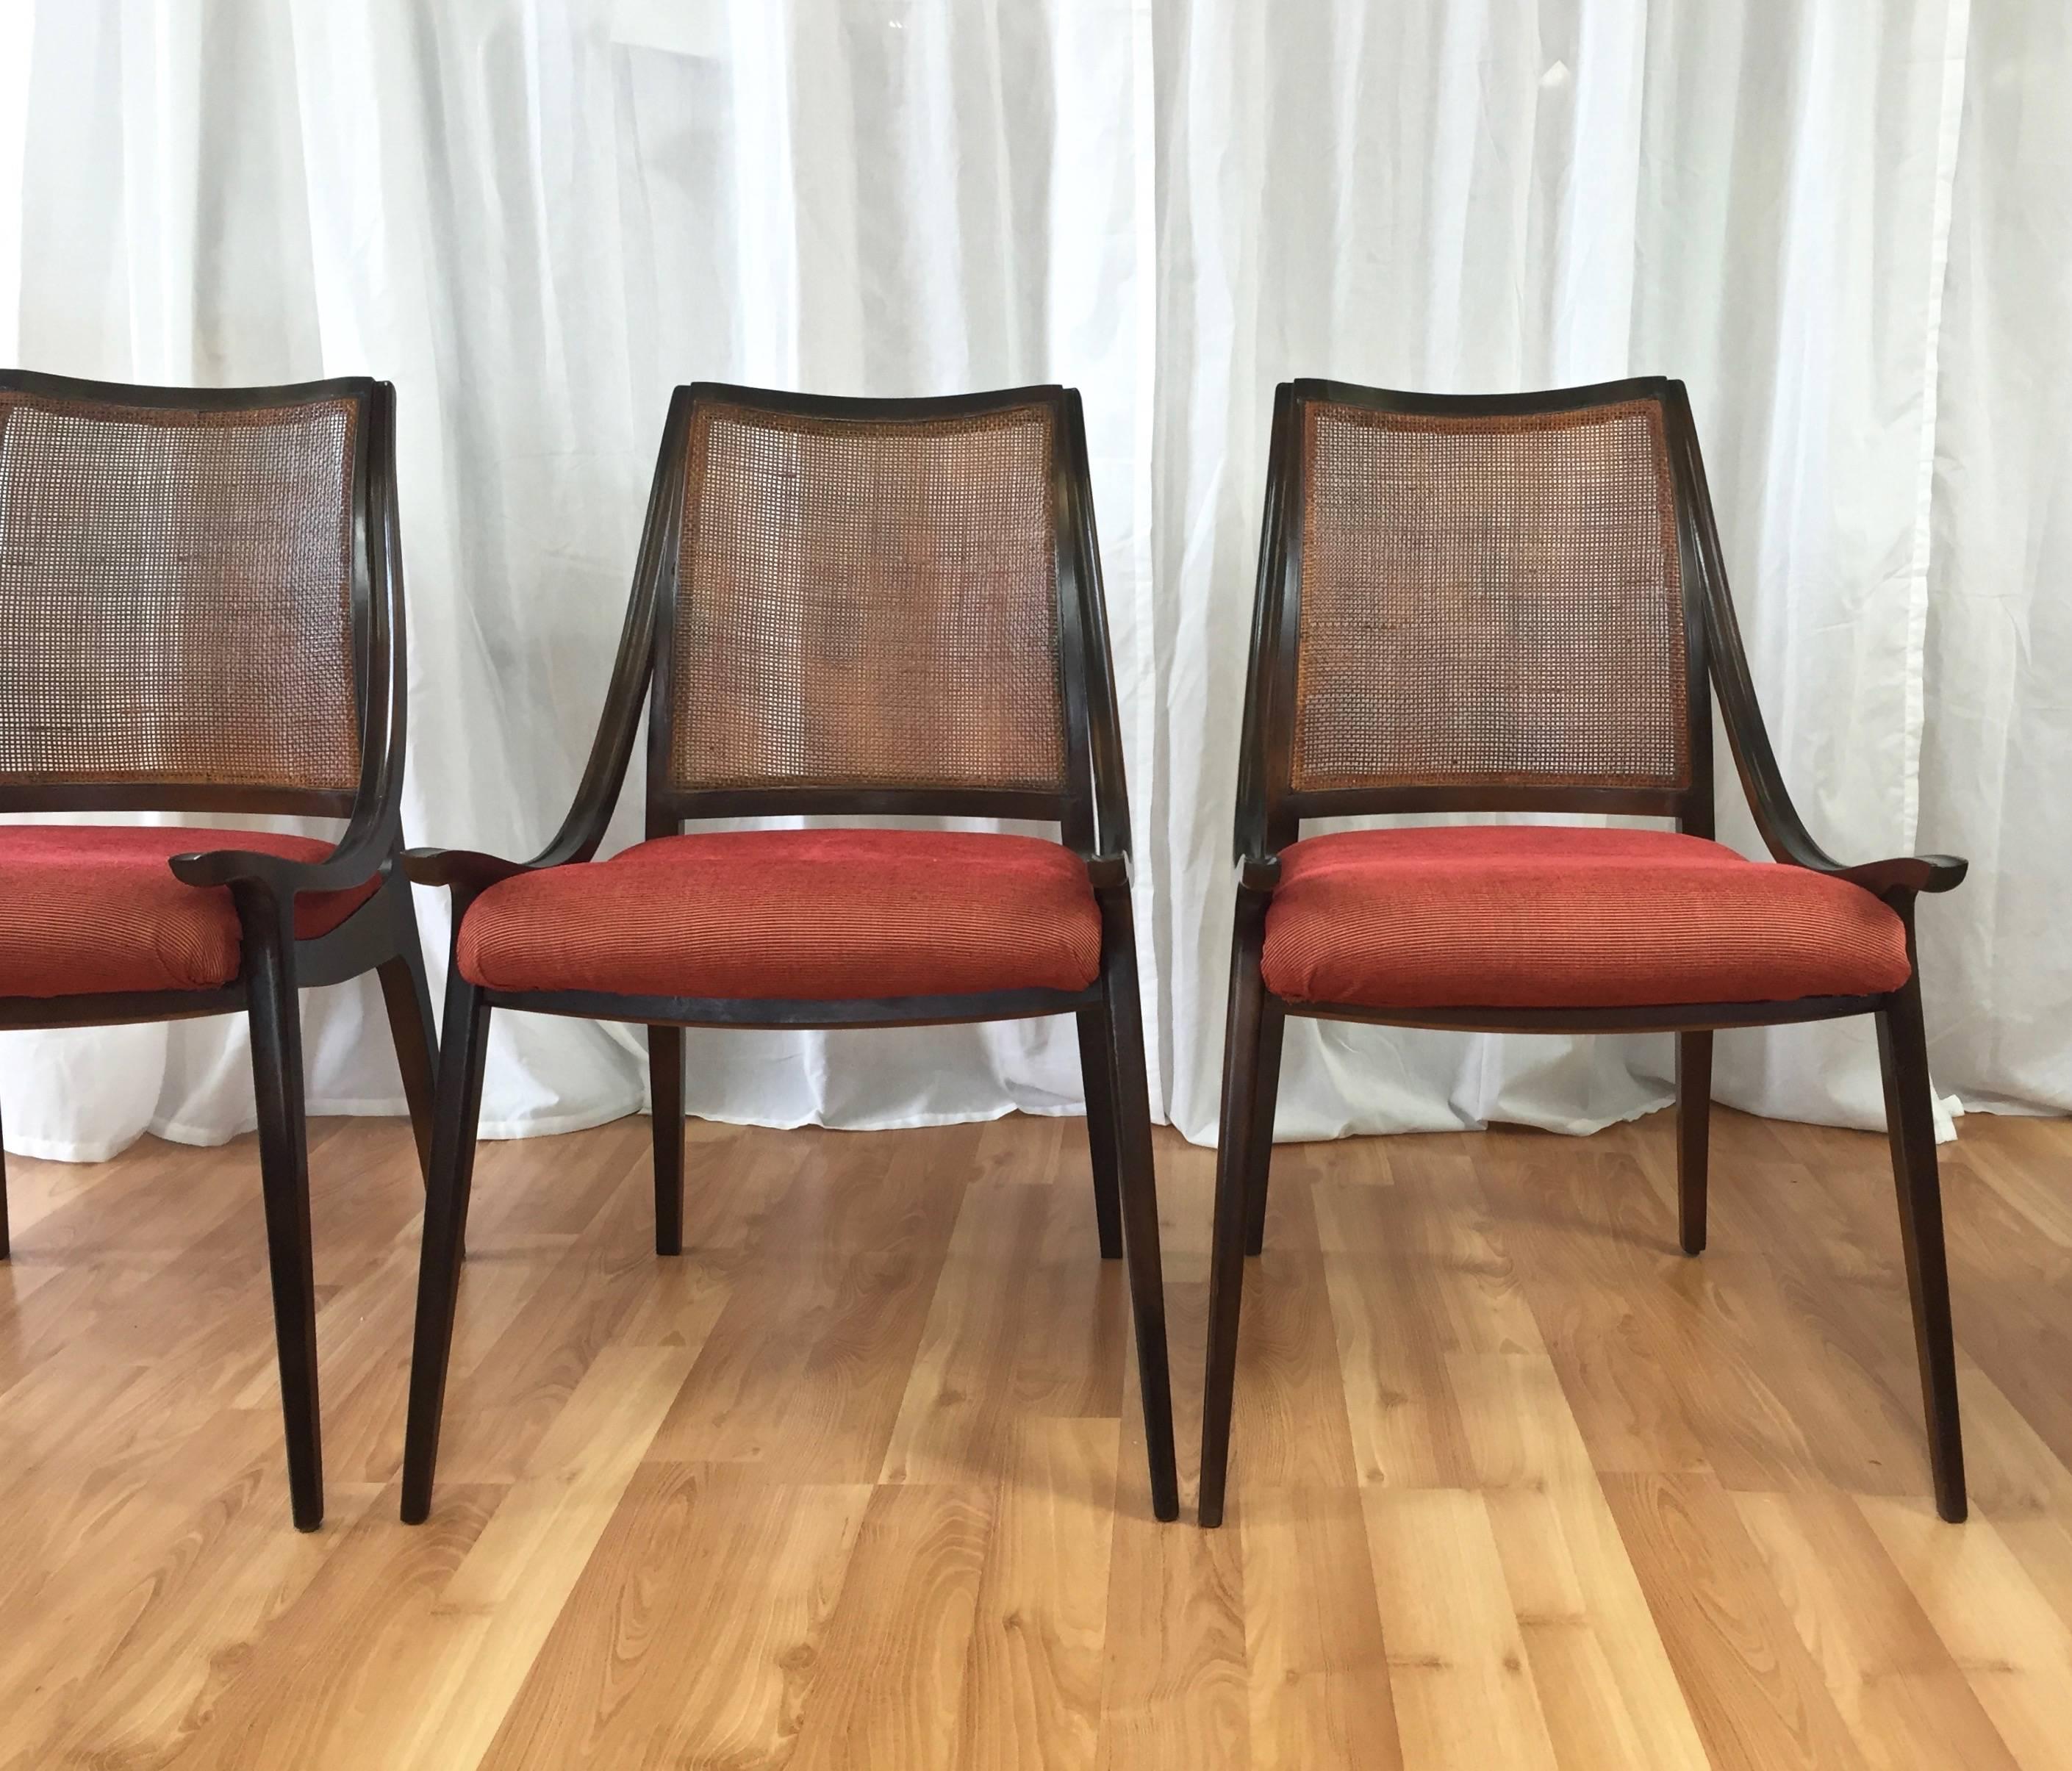 A four-piece set of uncommon mid-century walnut dining chairs with woven cane backs and upholstered seats by Richard Thompson for Glenn of California.

Curvaceous back and low-profile arms create an unusually striking silhouette. Walnut frame is